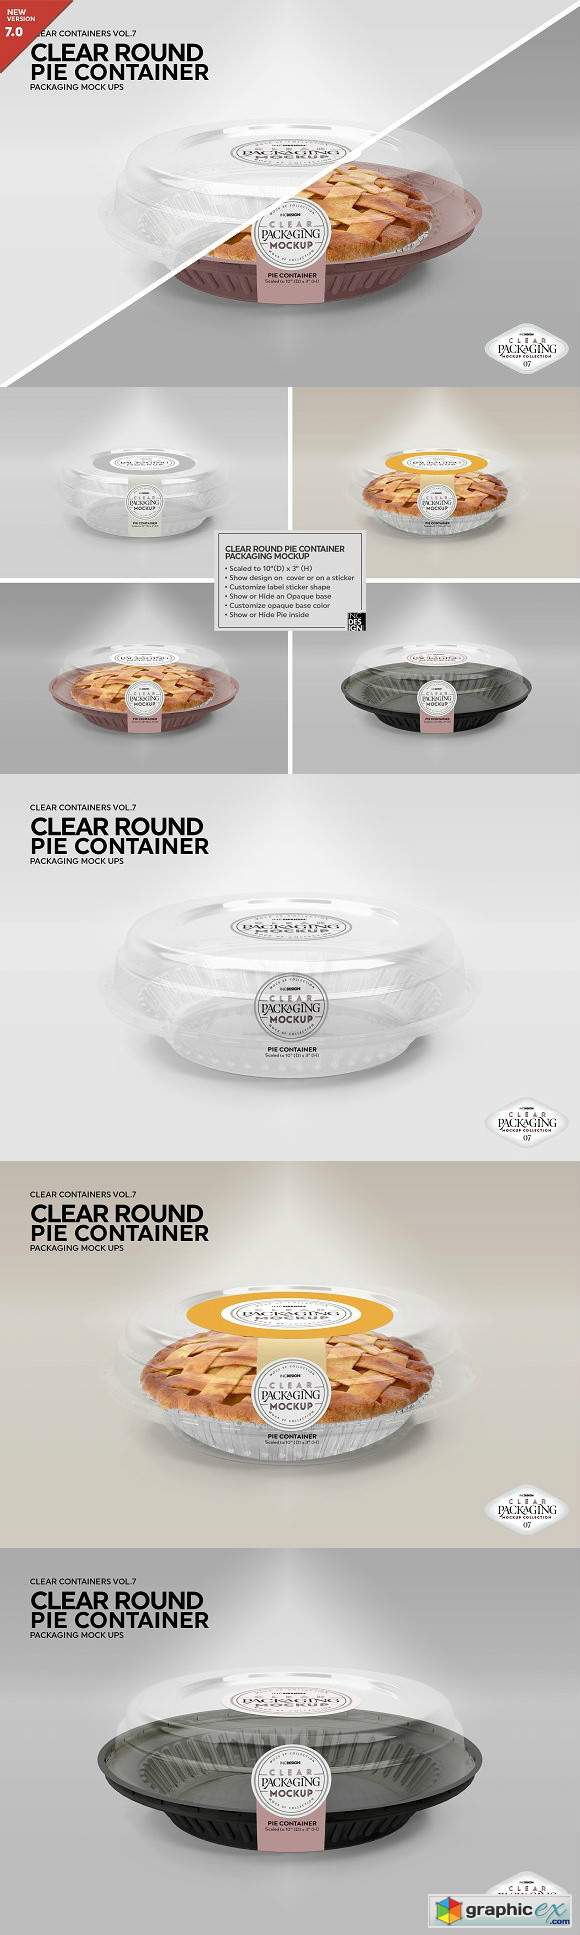 Clear Pie Container Packaging Mockup